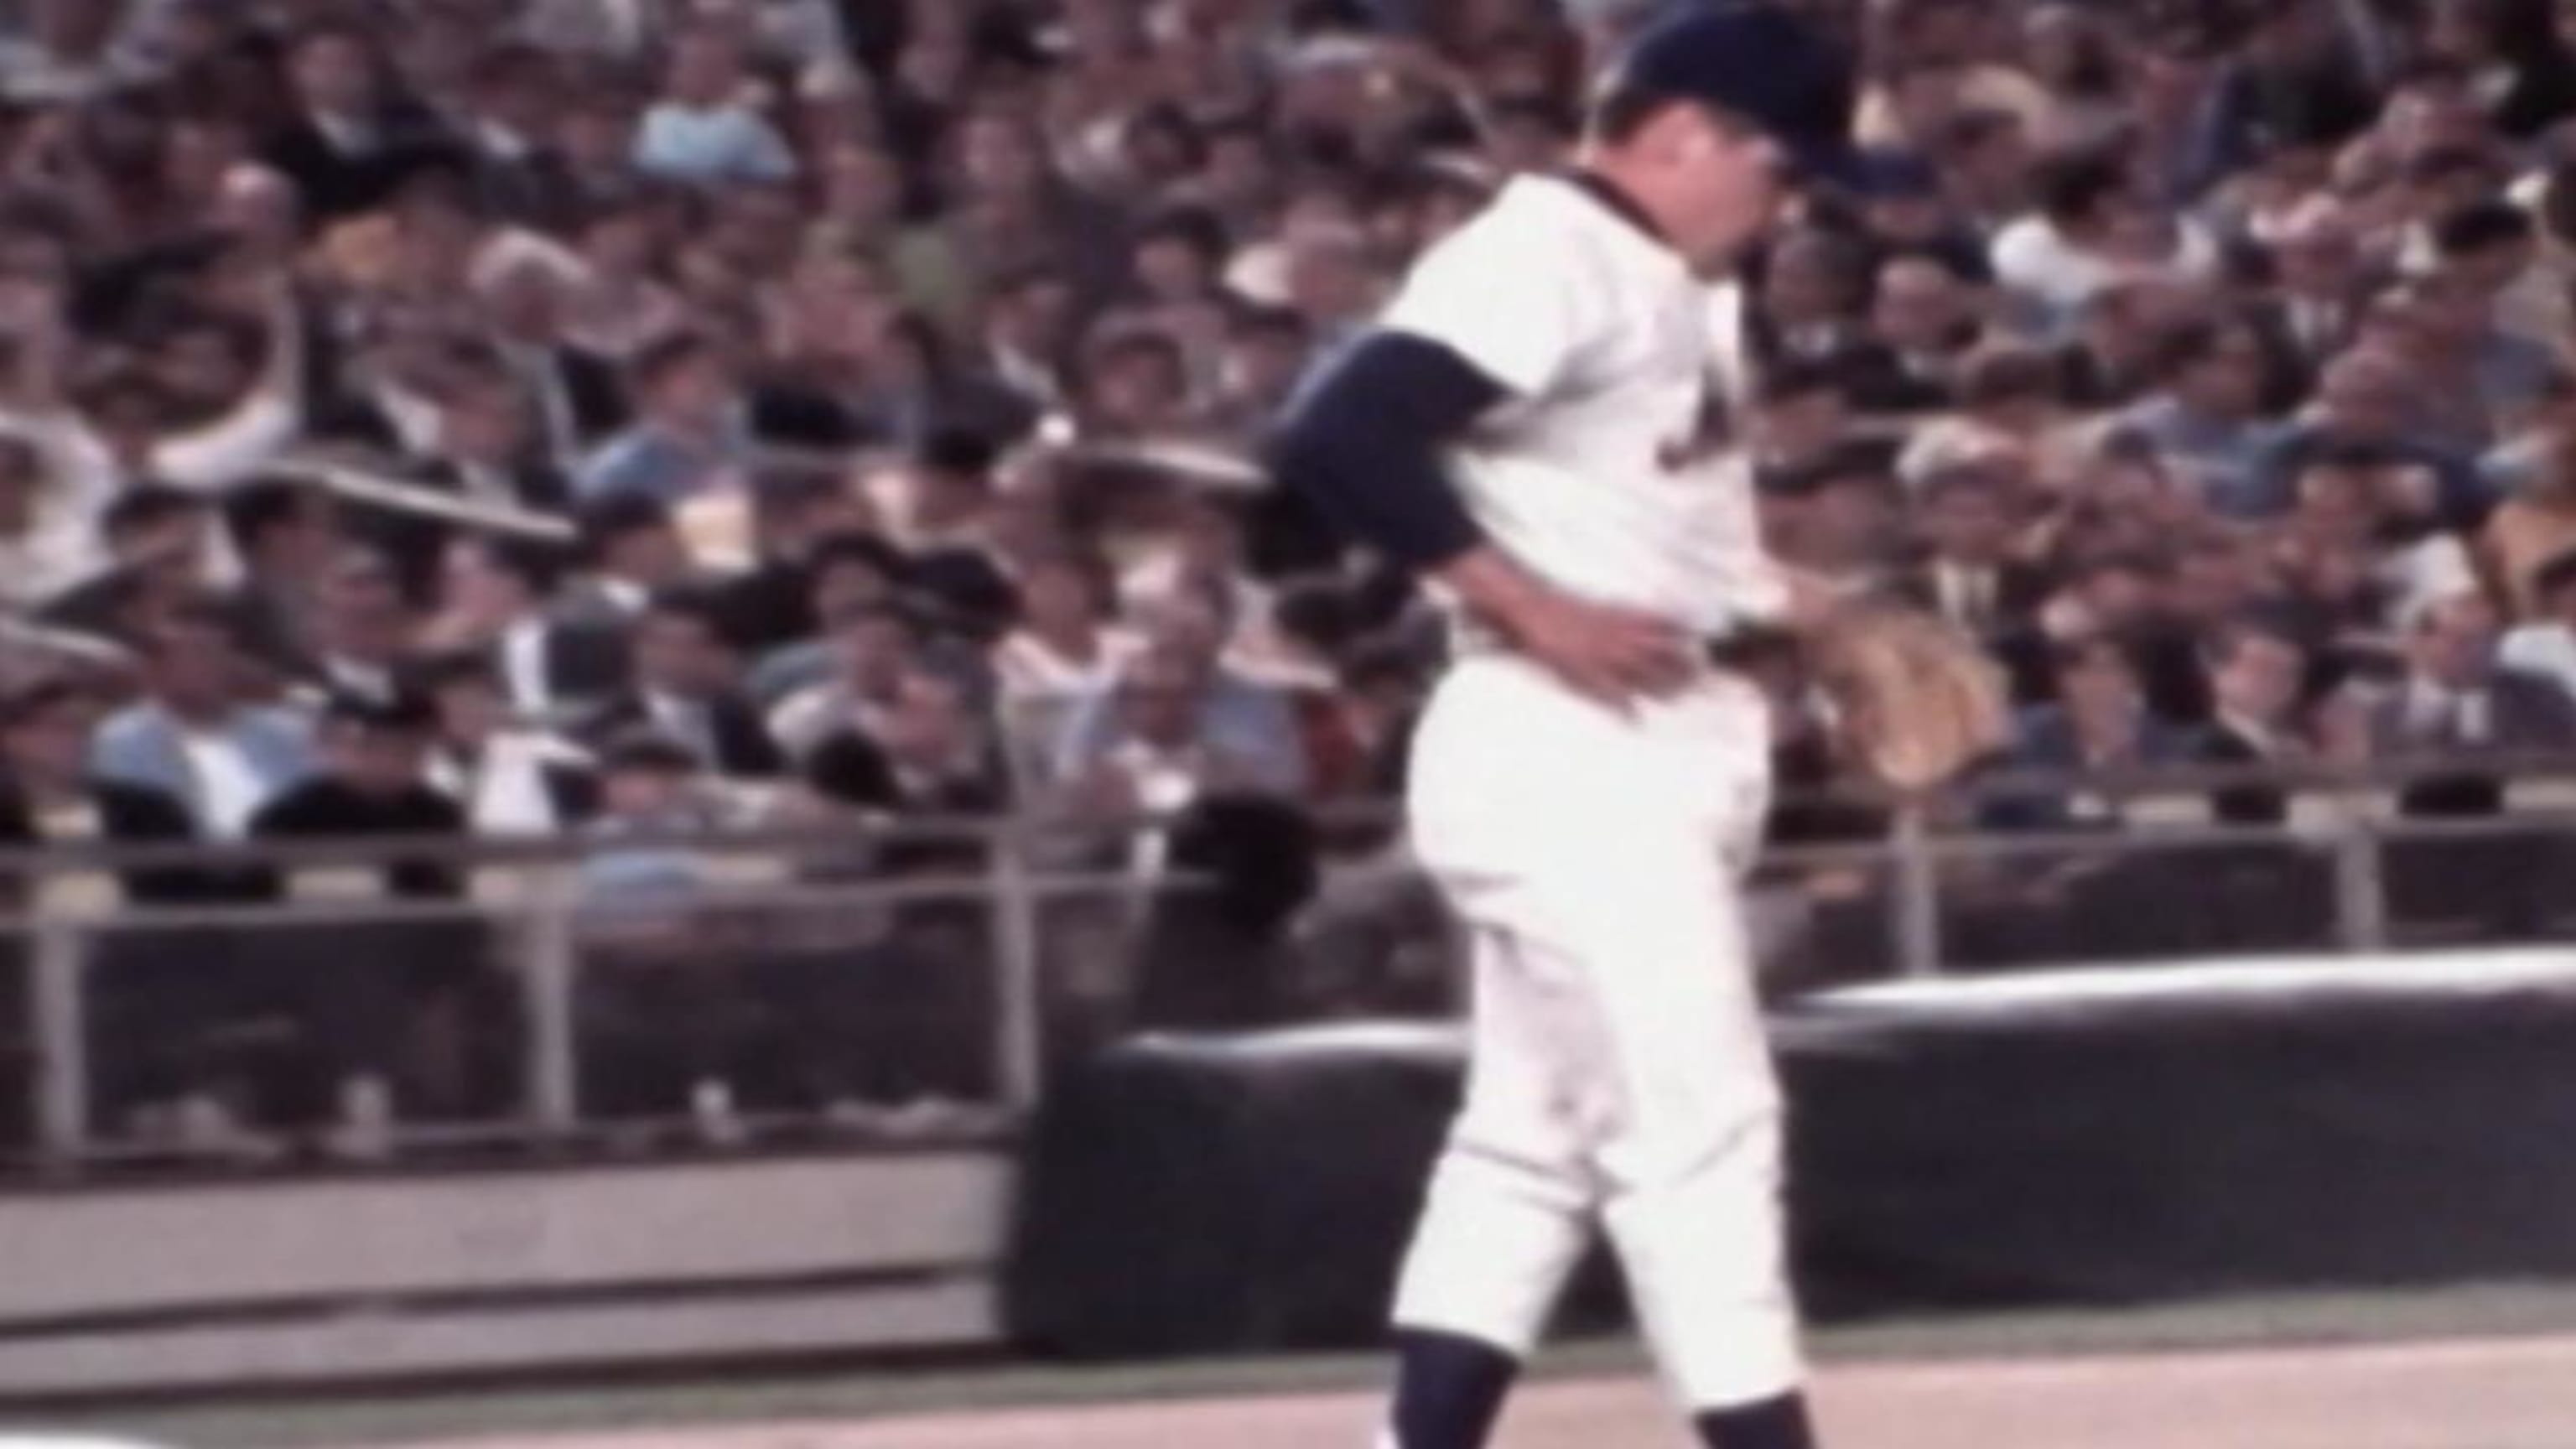 Mets legend Tom Seaver's life and career: The great moments